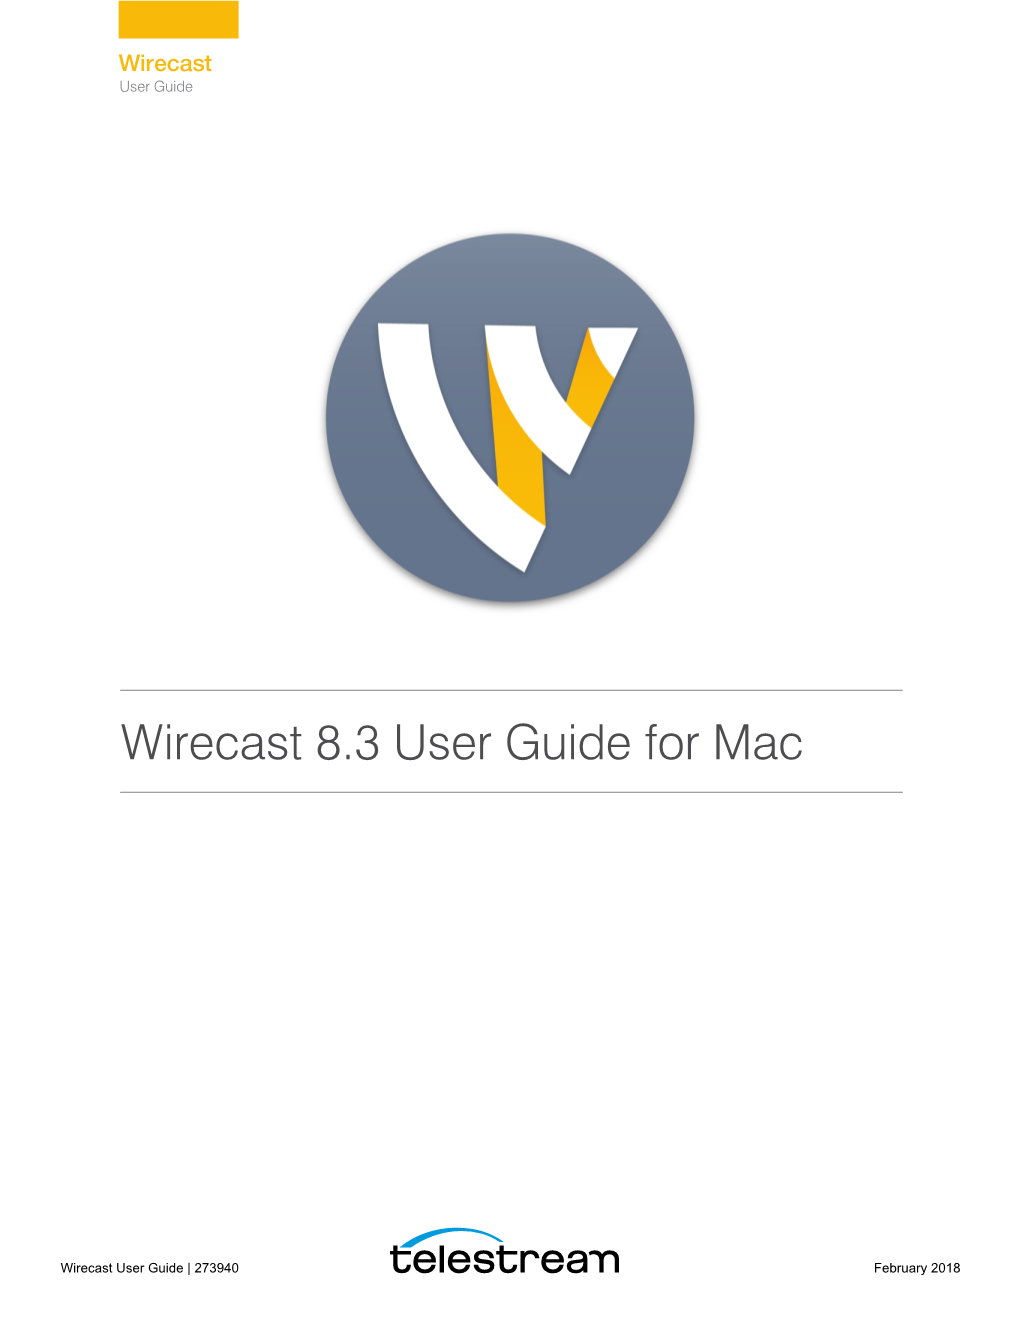 Wirecast 8.3 User Guide for Mac